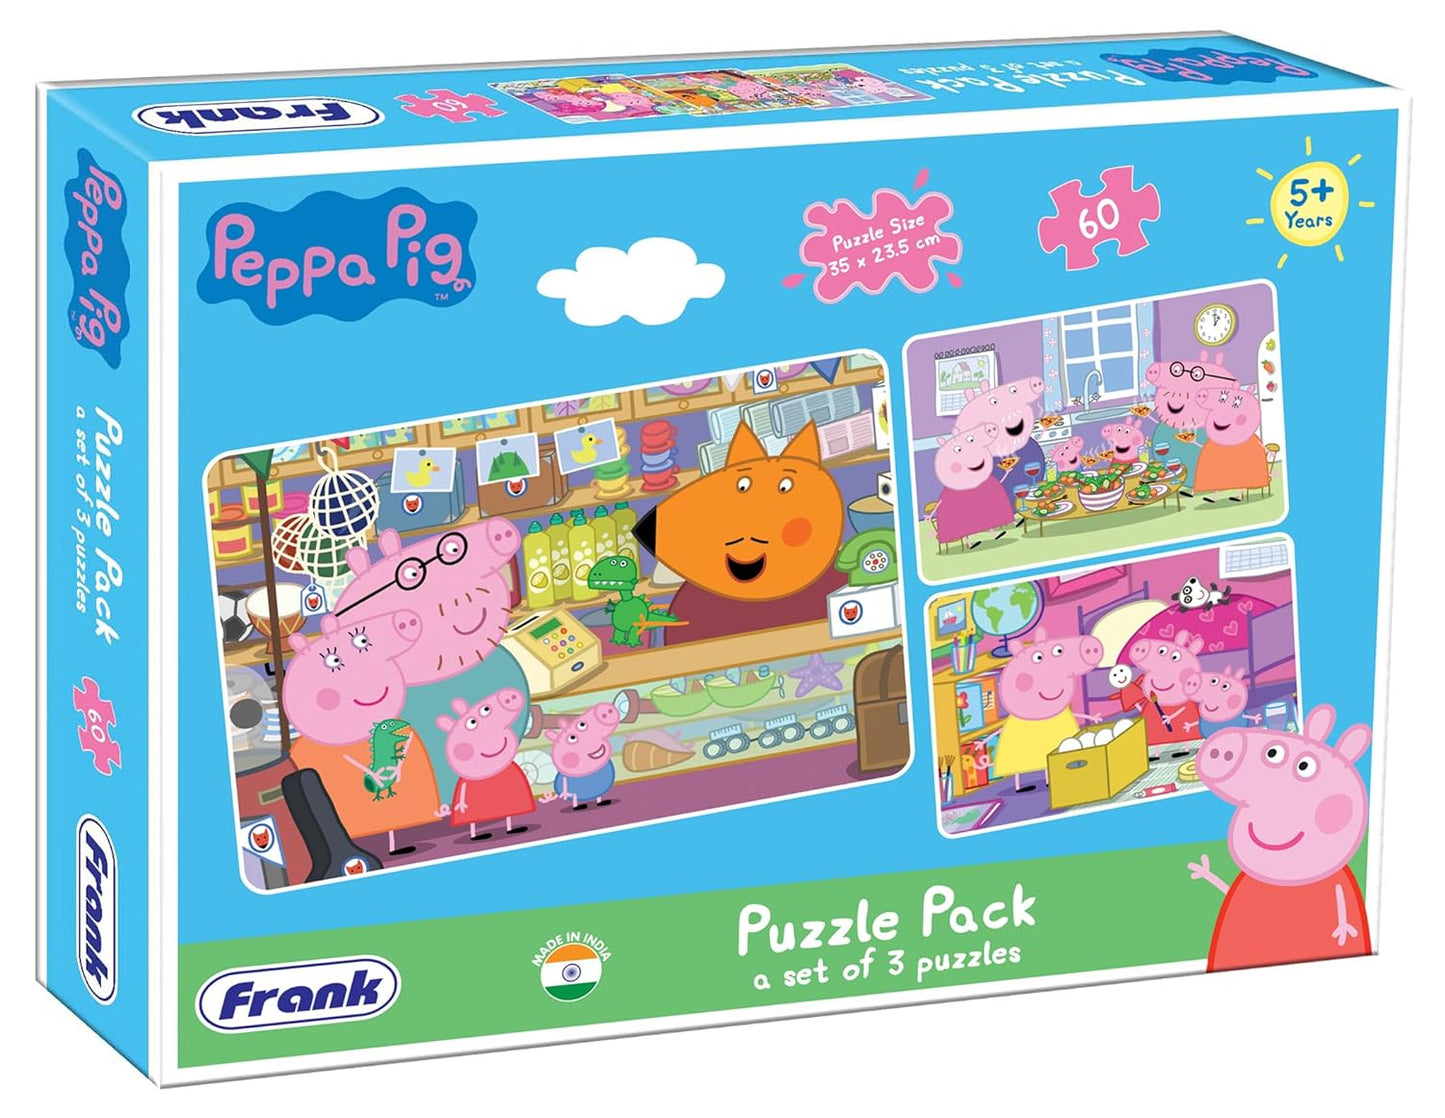 Frank Peppa Pig (60 Pieces) 3-in-1 Jigsaw Puzzle